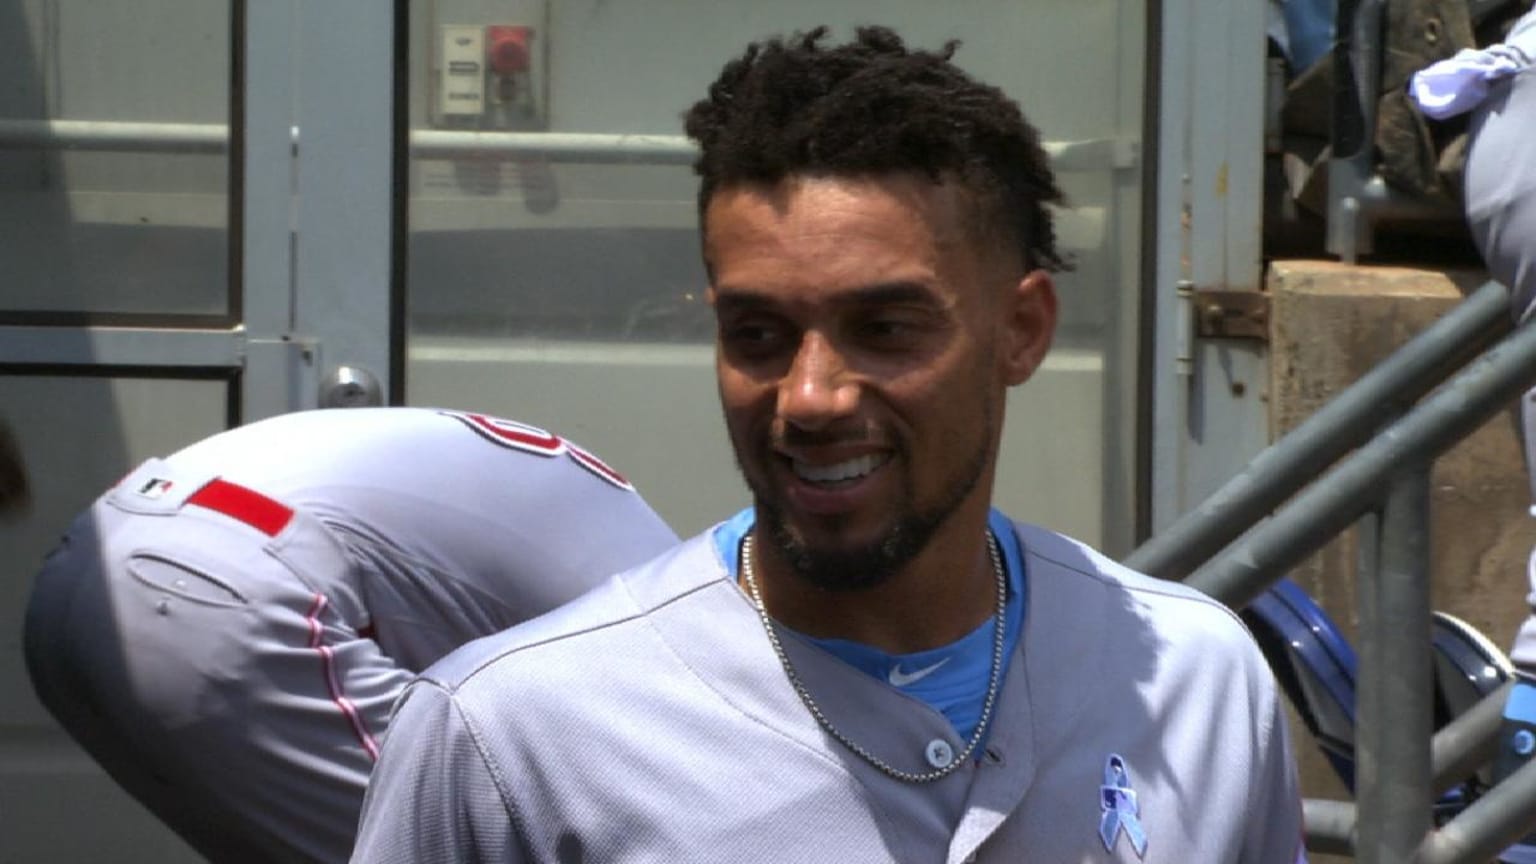 Billy Hamilton thanks Reds, Cincinnati fans with Royals deal complete